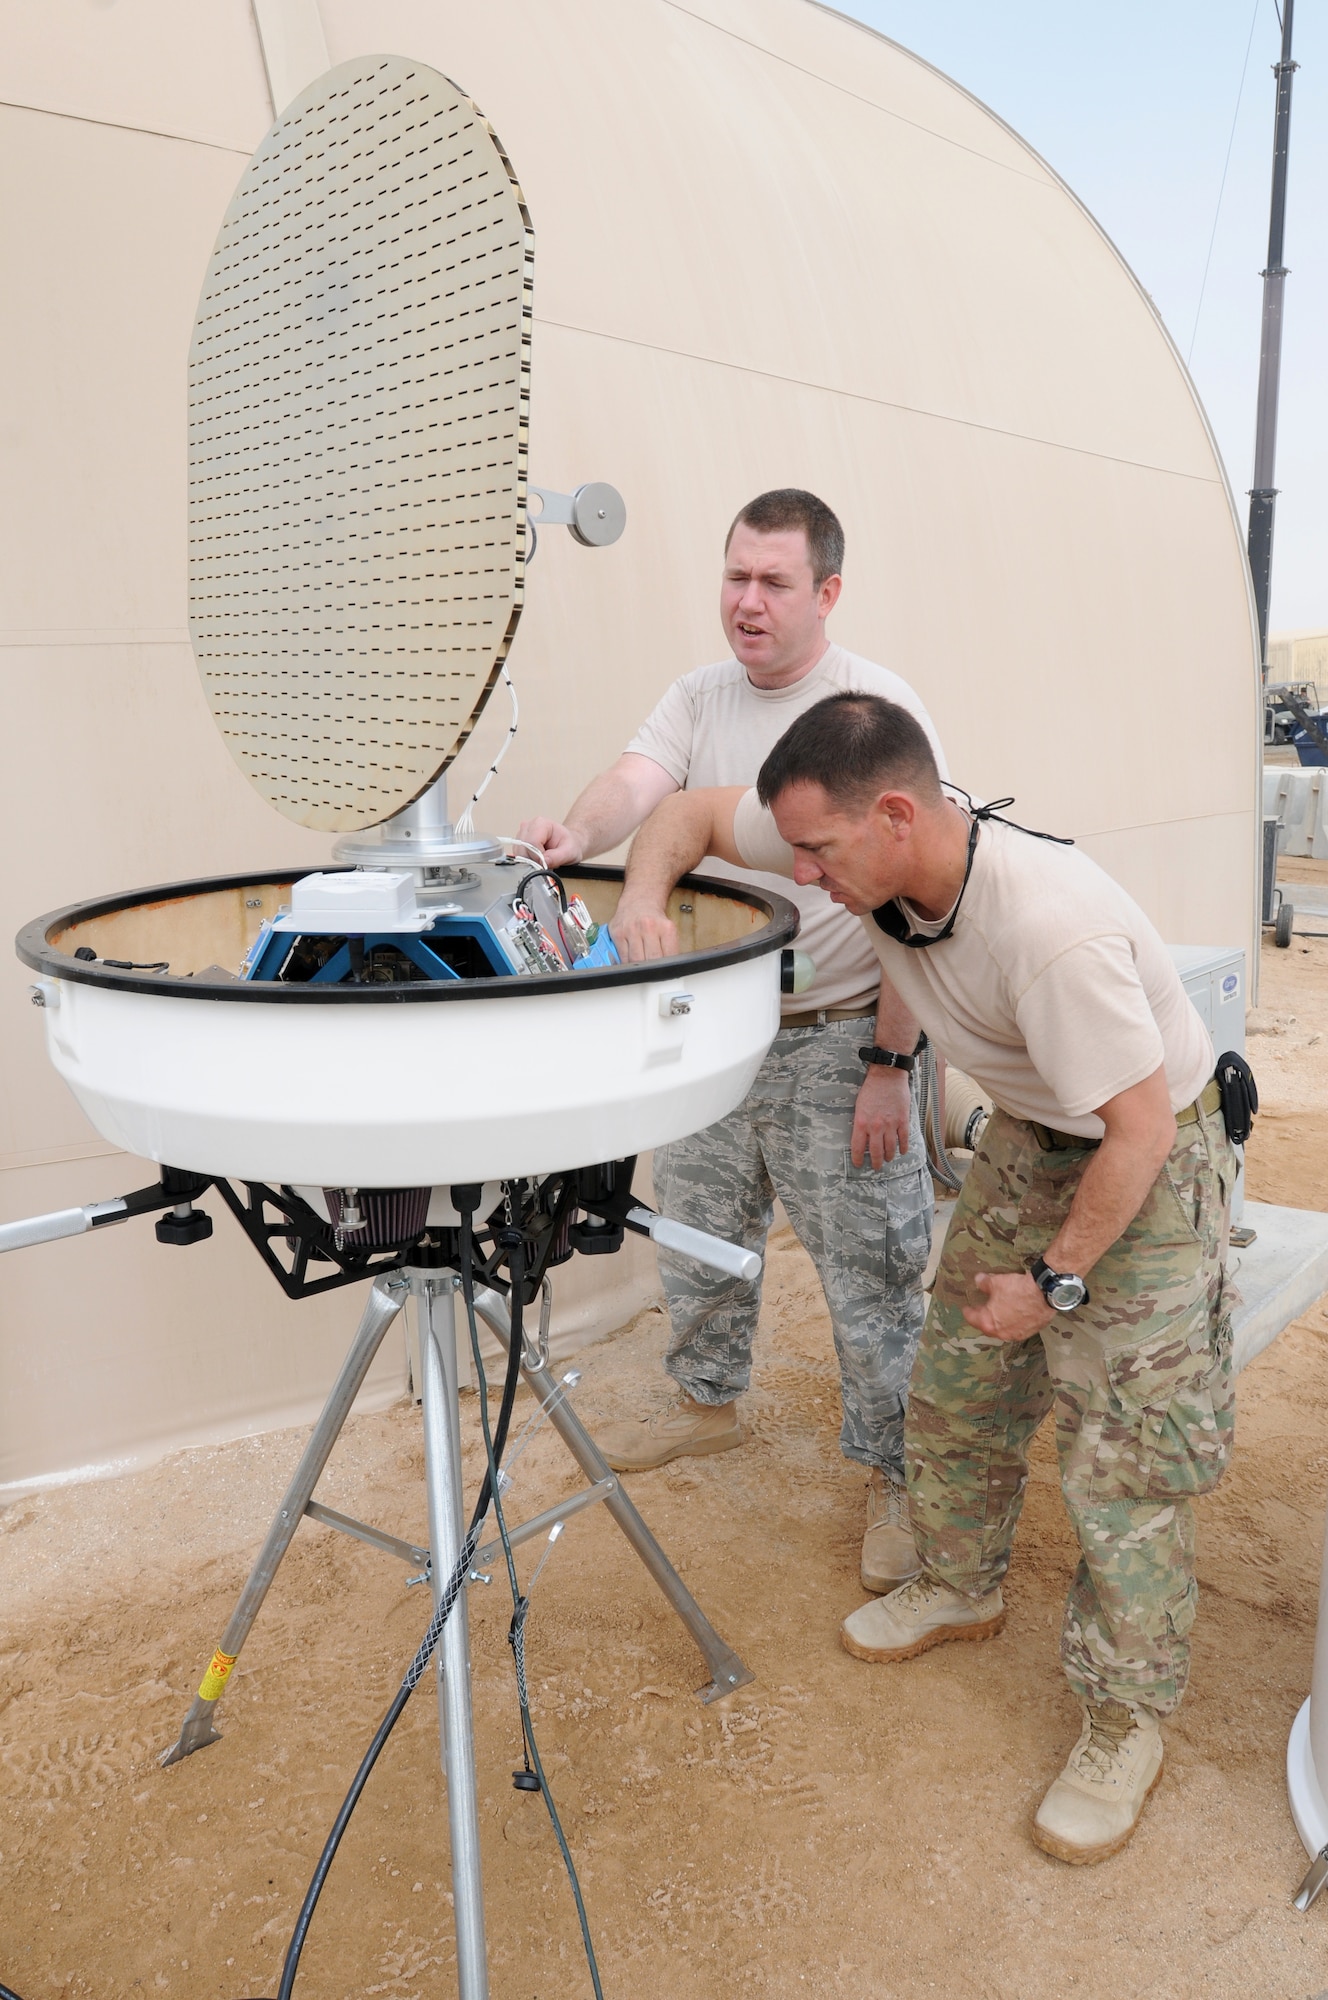 SOUTHWEST ASIA - U.S. Air Force Staff Sgt. Samuel Trammel and Tech. Sgt. Matthew Brown, U.S. Air Forces Central Weather Systems Support Cadre members, inspect a portable Doppler radar prior to installing it at the 380th Air Expeditionary Wing Sept. 12, 2012. Doppler radar will allow the 380th Expeditionary Operations Support Squadron Weather flight to interrogate a storm and gather real-time storm data. (U.S. Air Force photo/Tech. Sgt. Amanda Savannah)